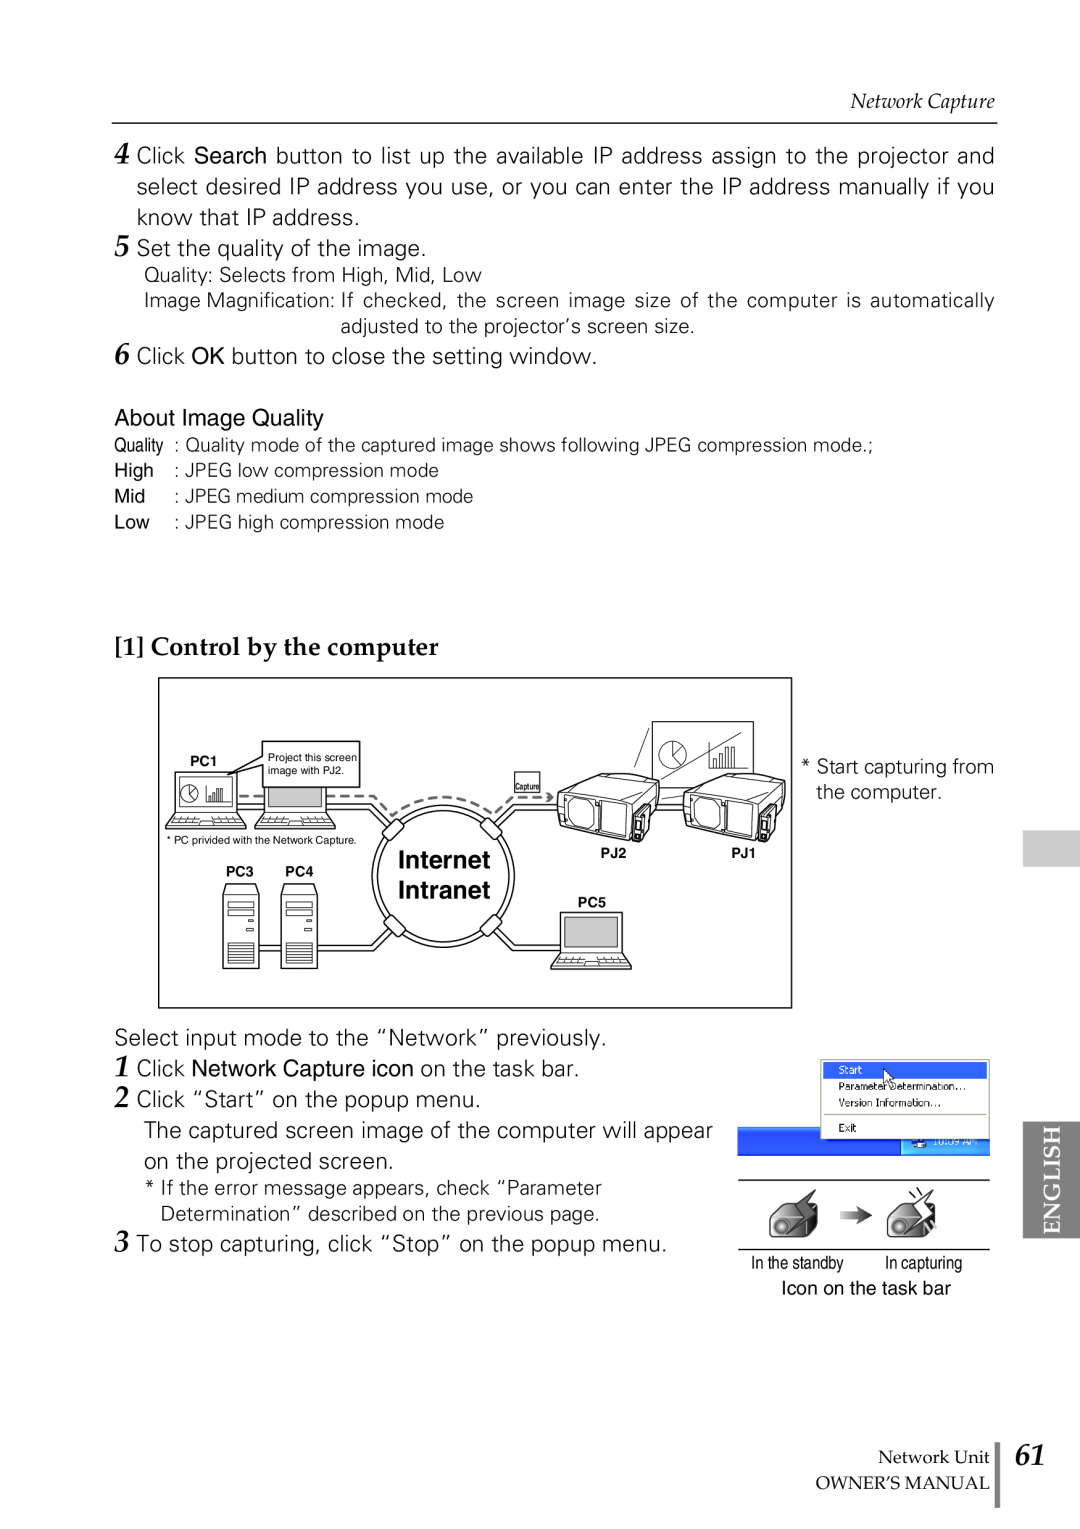 Sanyo POA-PN02 owner manual Control by the computer, Internet PJ2 Intranet, English 